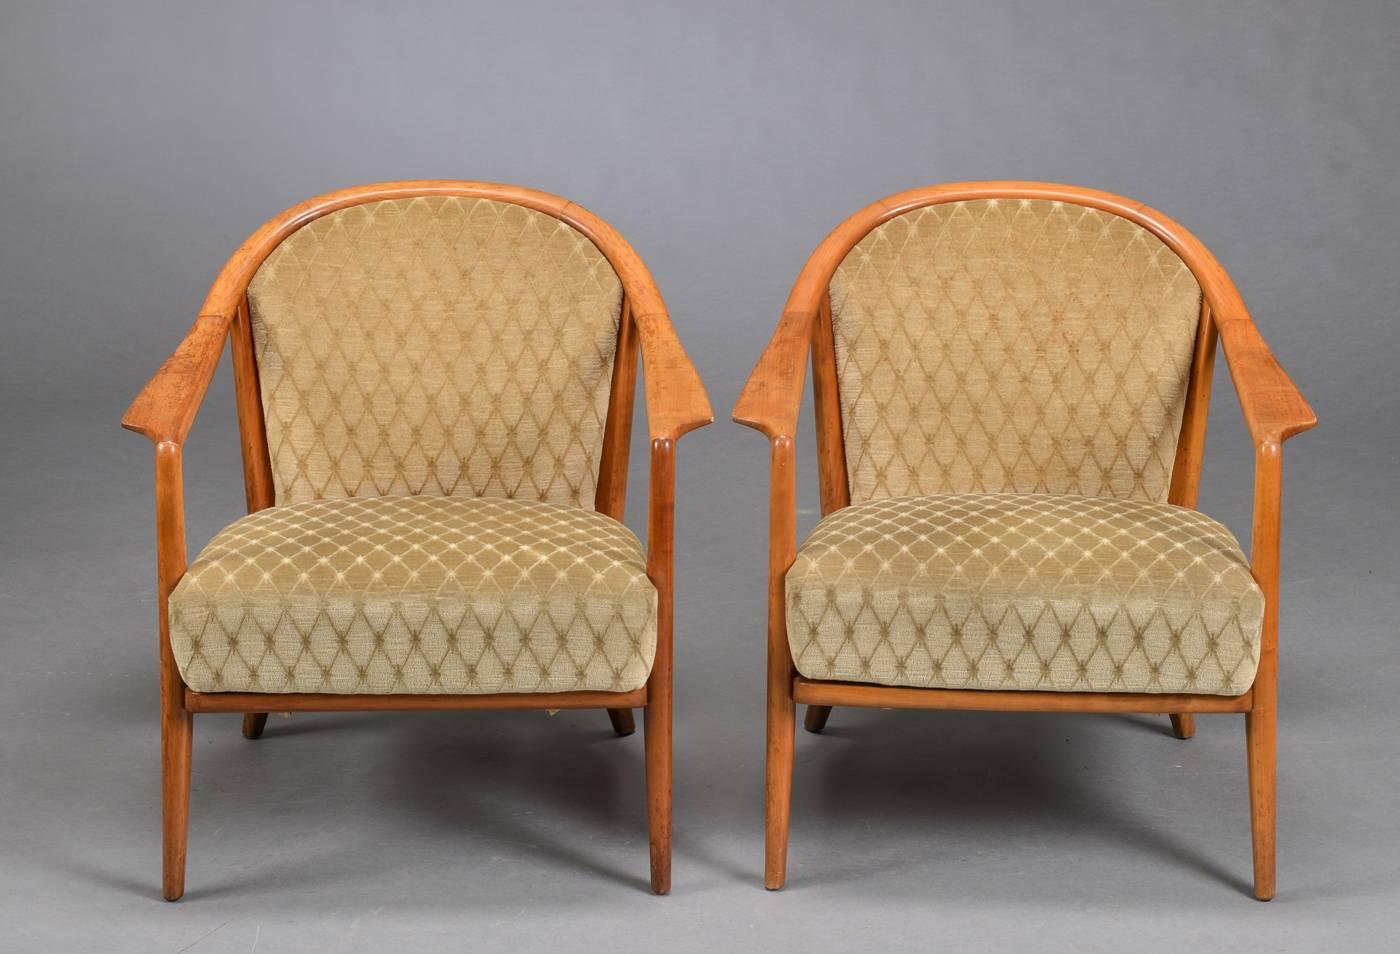 Elegant and comfortable pair of Swedish bergere armchairs in natural cherry wood upholstered in a gold
diamond-patterned mohair.